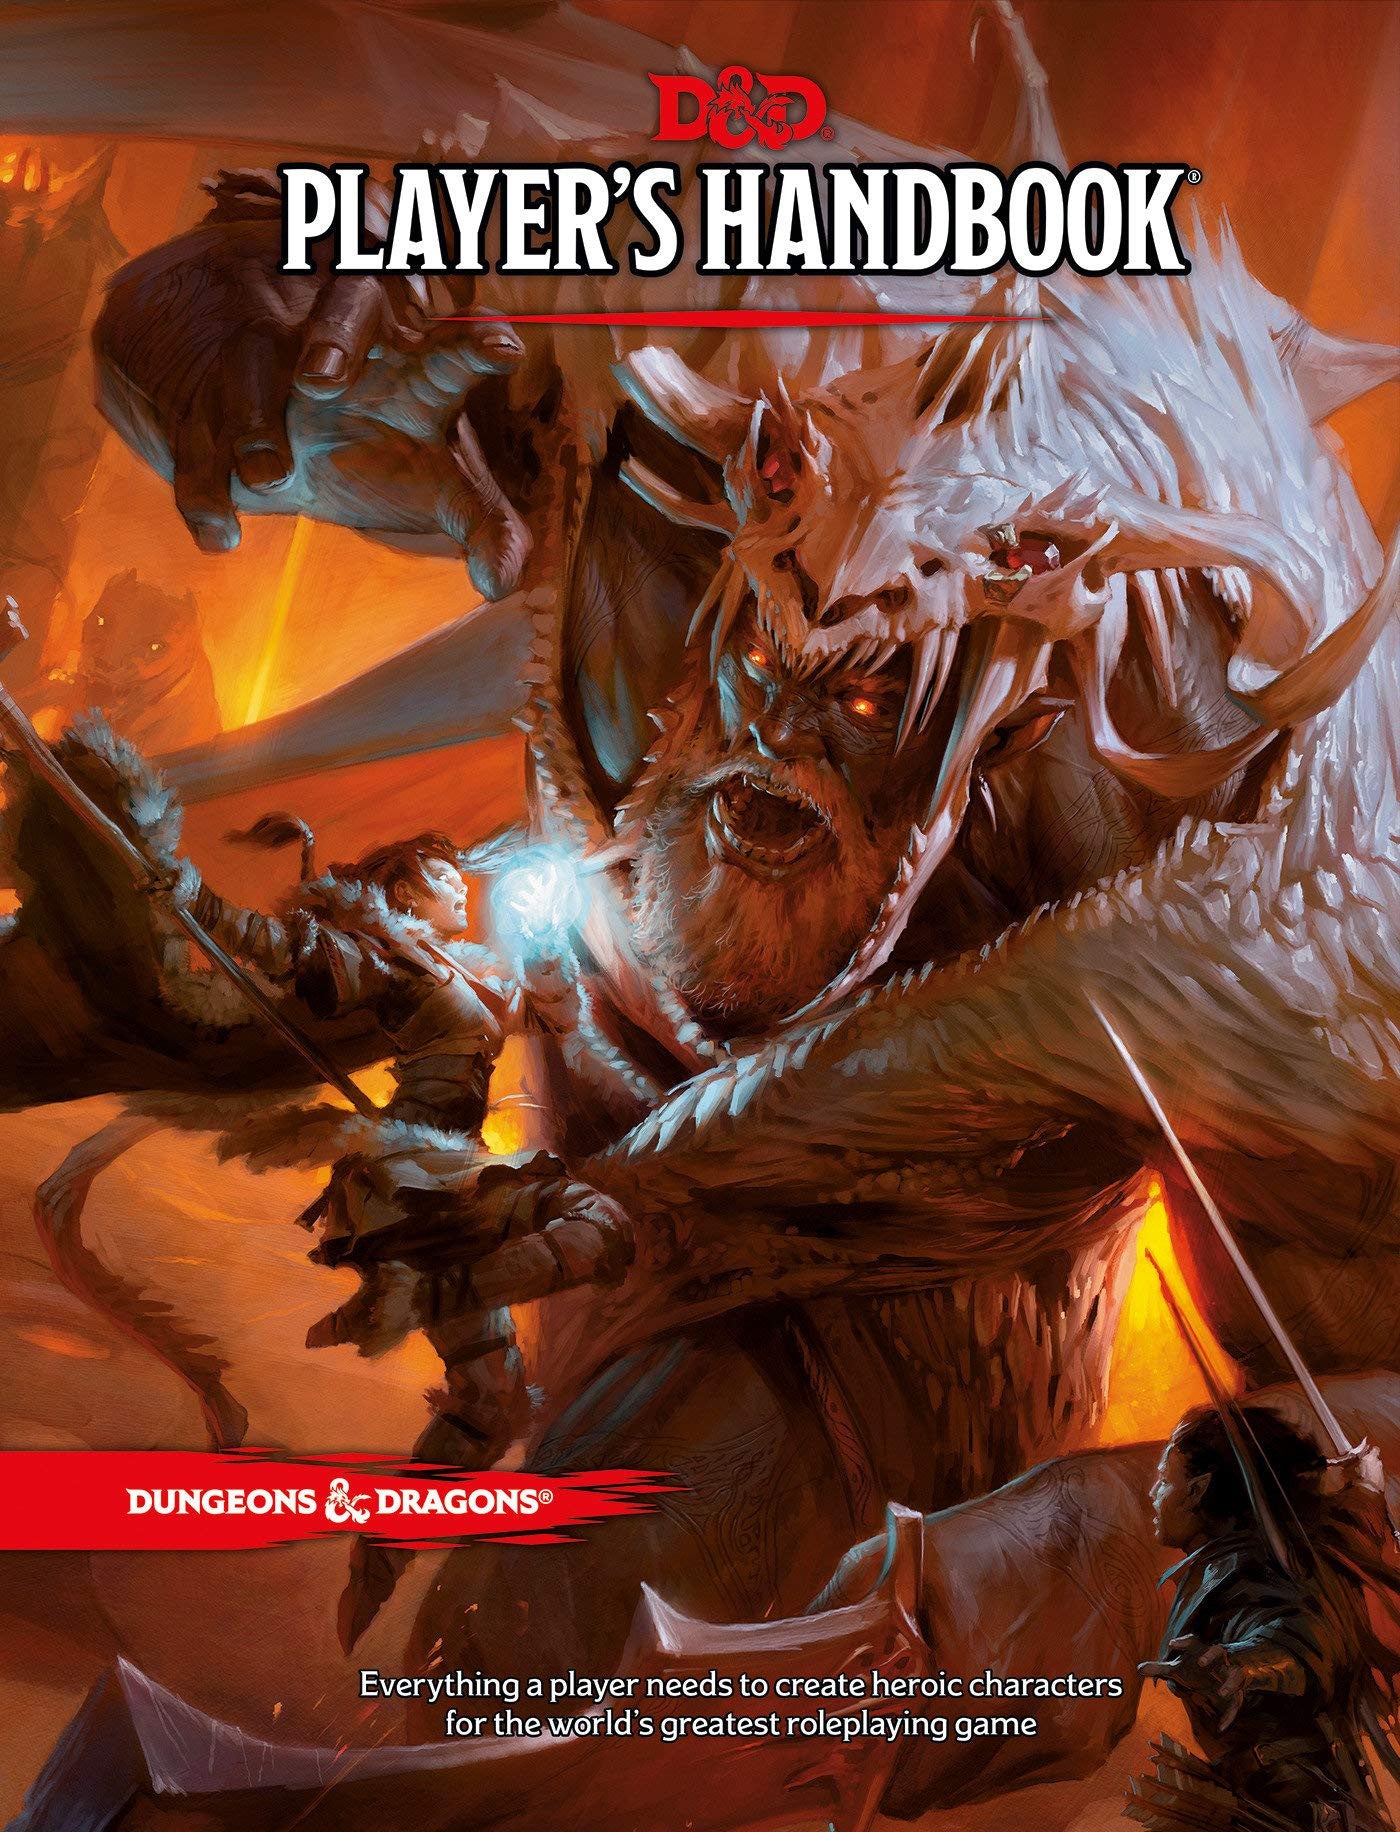 D&D Dungeons & Dragons Players Handbook 5th Edition Hardcover